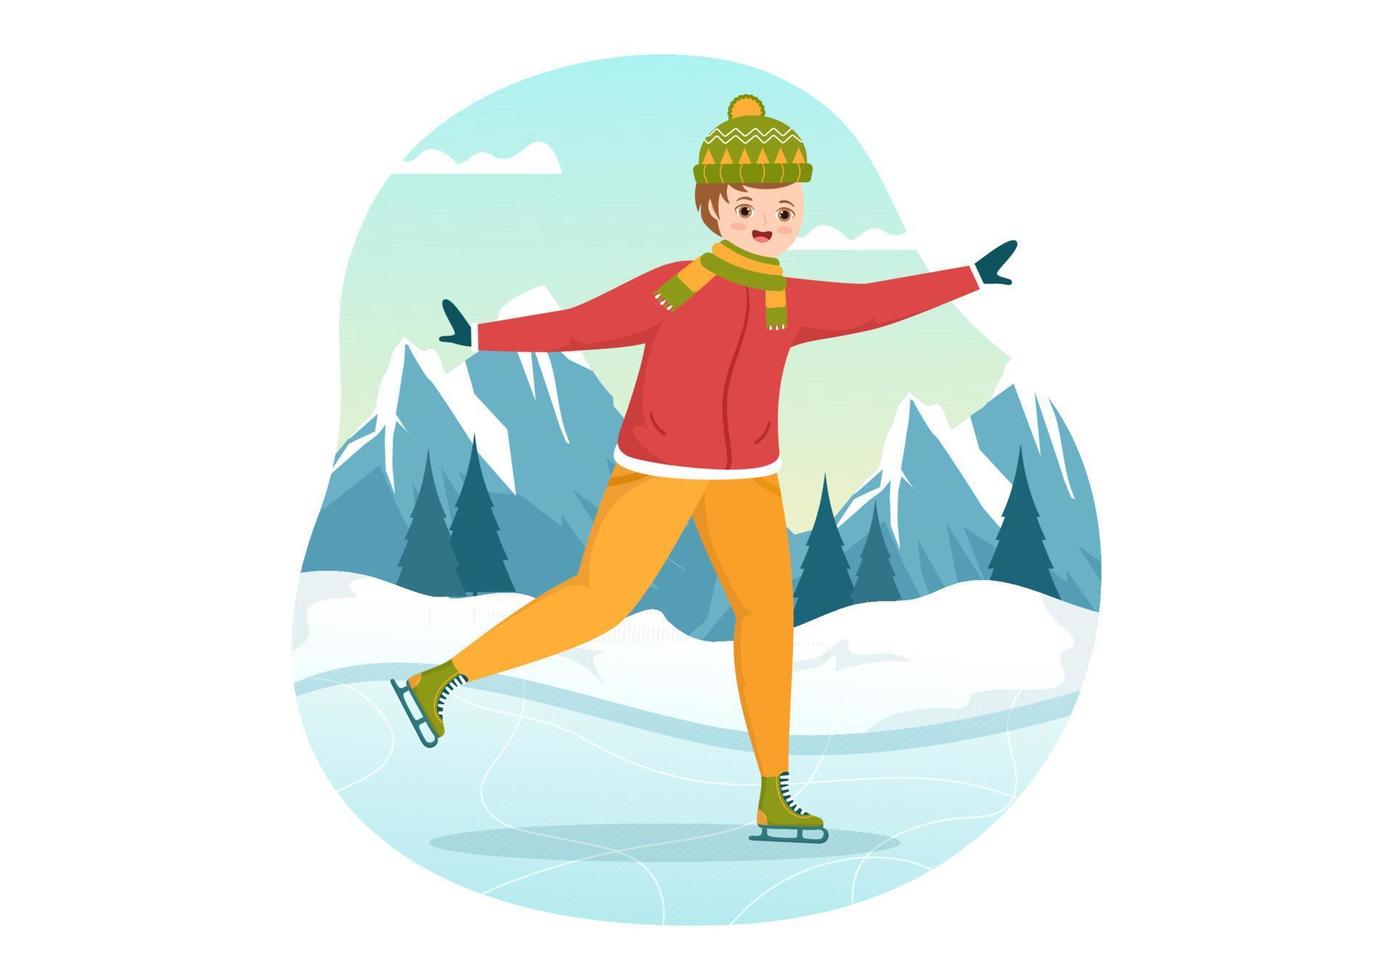 People Skating on Ice Rink Wearing Winter Clothes for Outdoor Activity or Sports Recreation in Flat Cartoon Hand Drawn Templates Illustration vector